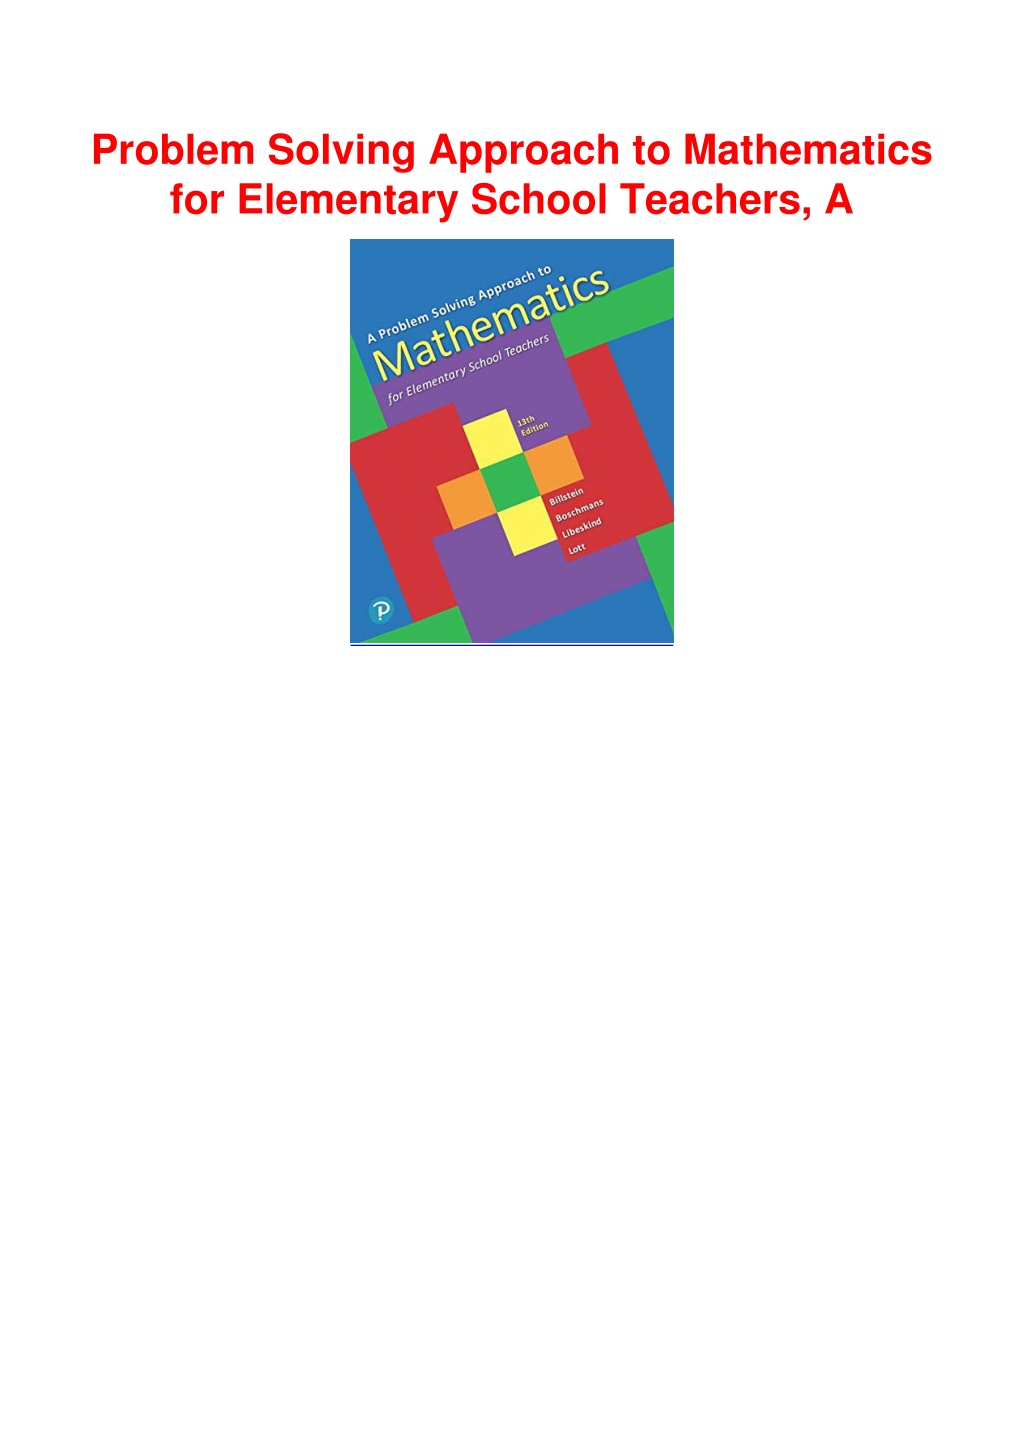 a problem solving approach to mathematics for elementary school teachers pdf